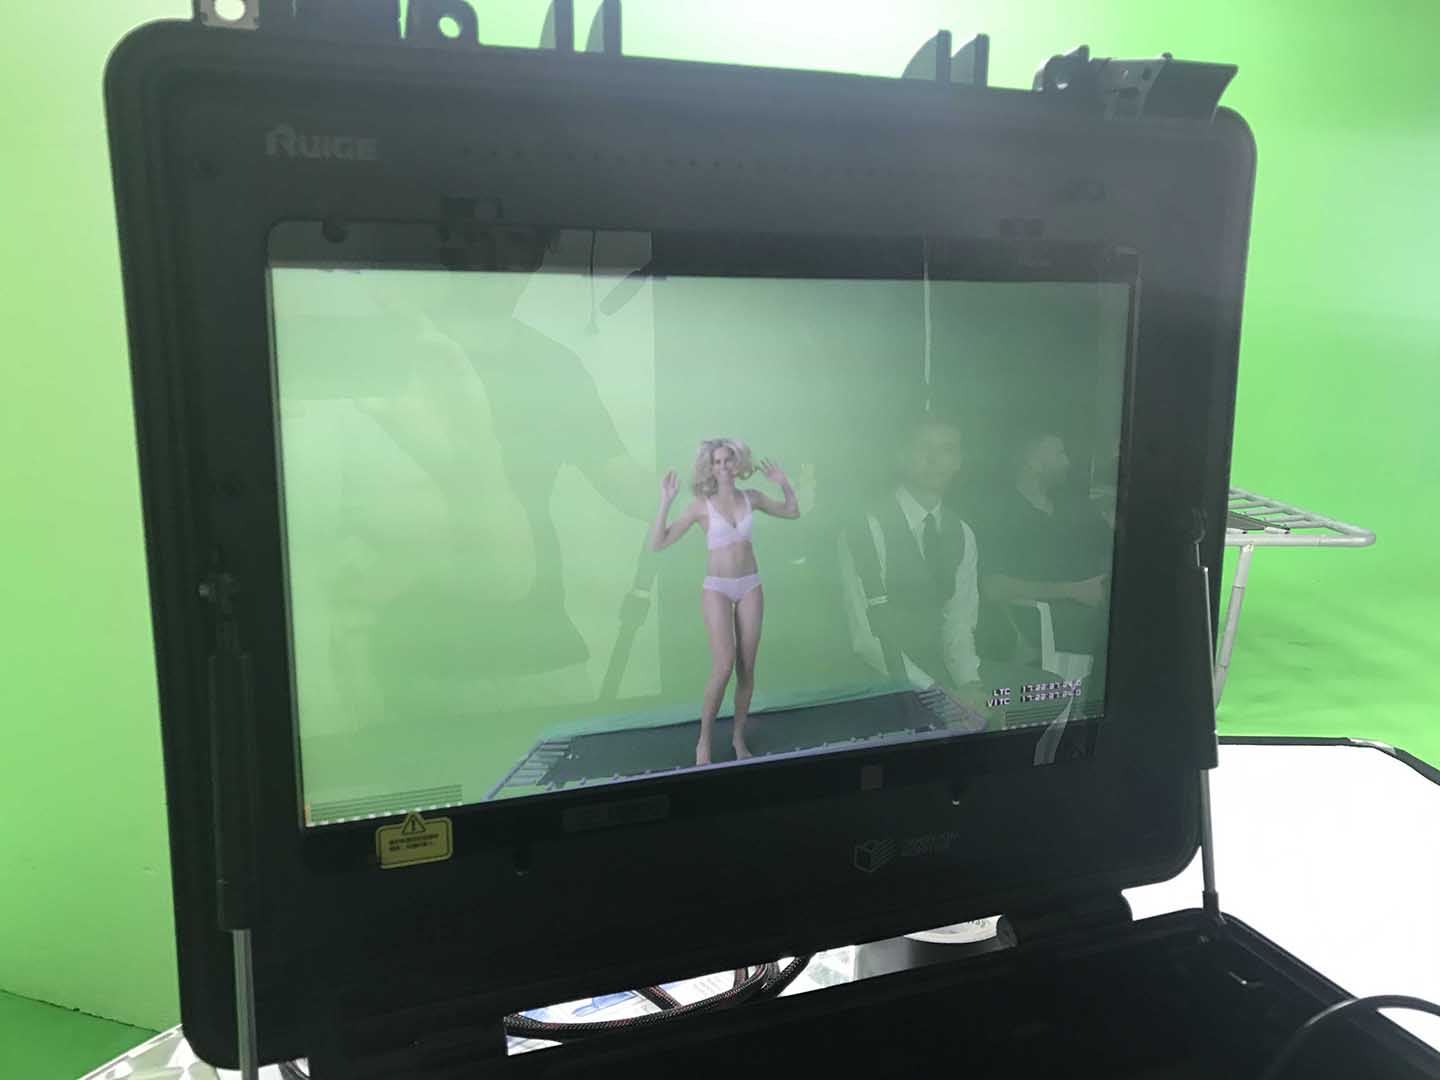 Through a monitor we see a female model on a trampoline in a green screen studio.